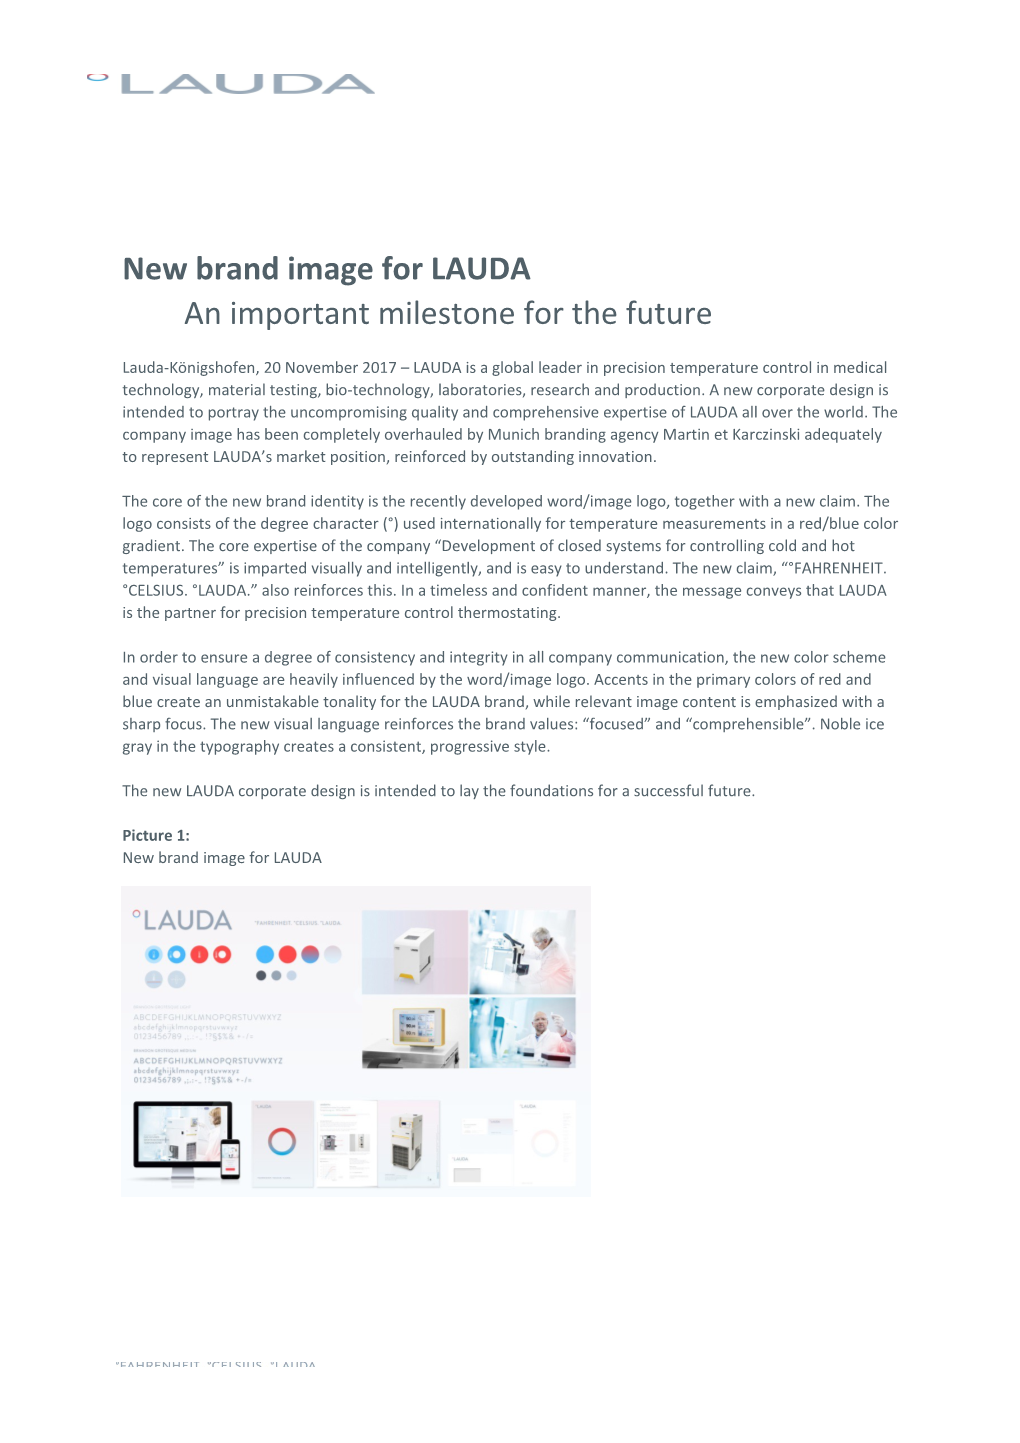 New Brand Image for LAUDA an Important Milestone for the Future